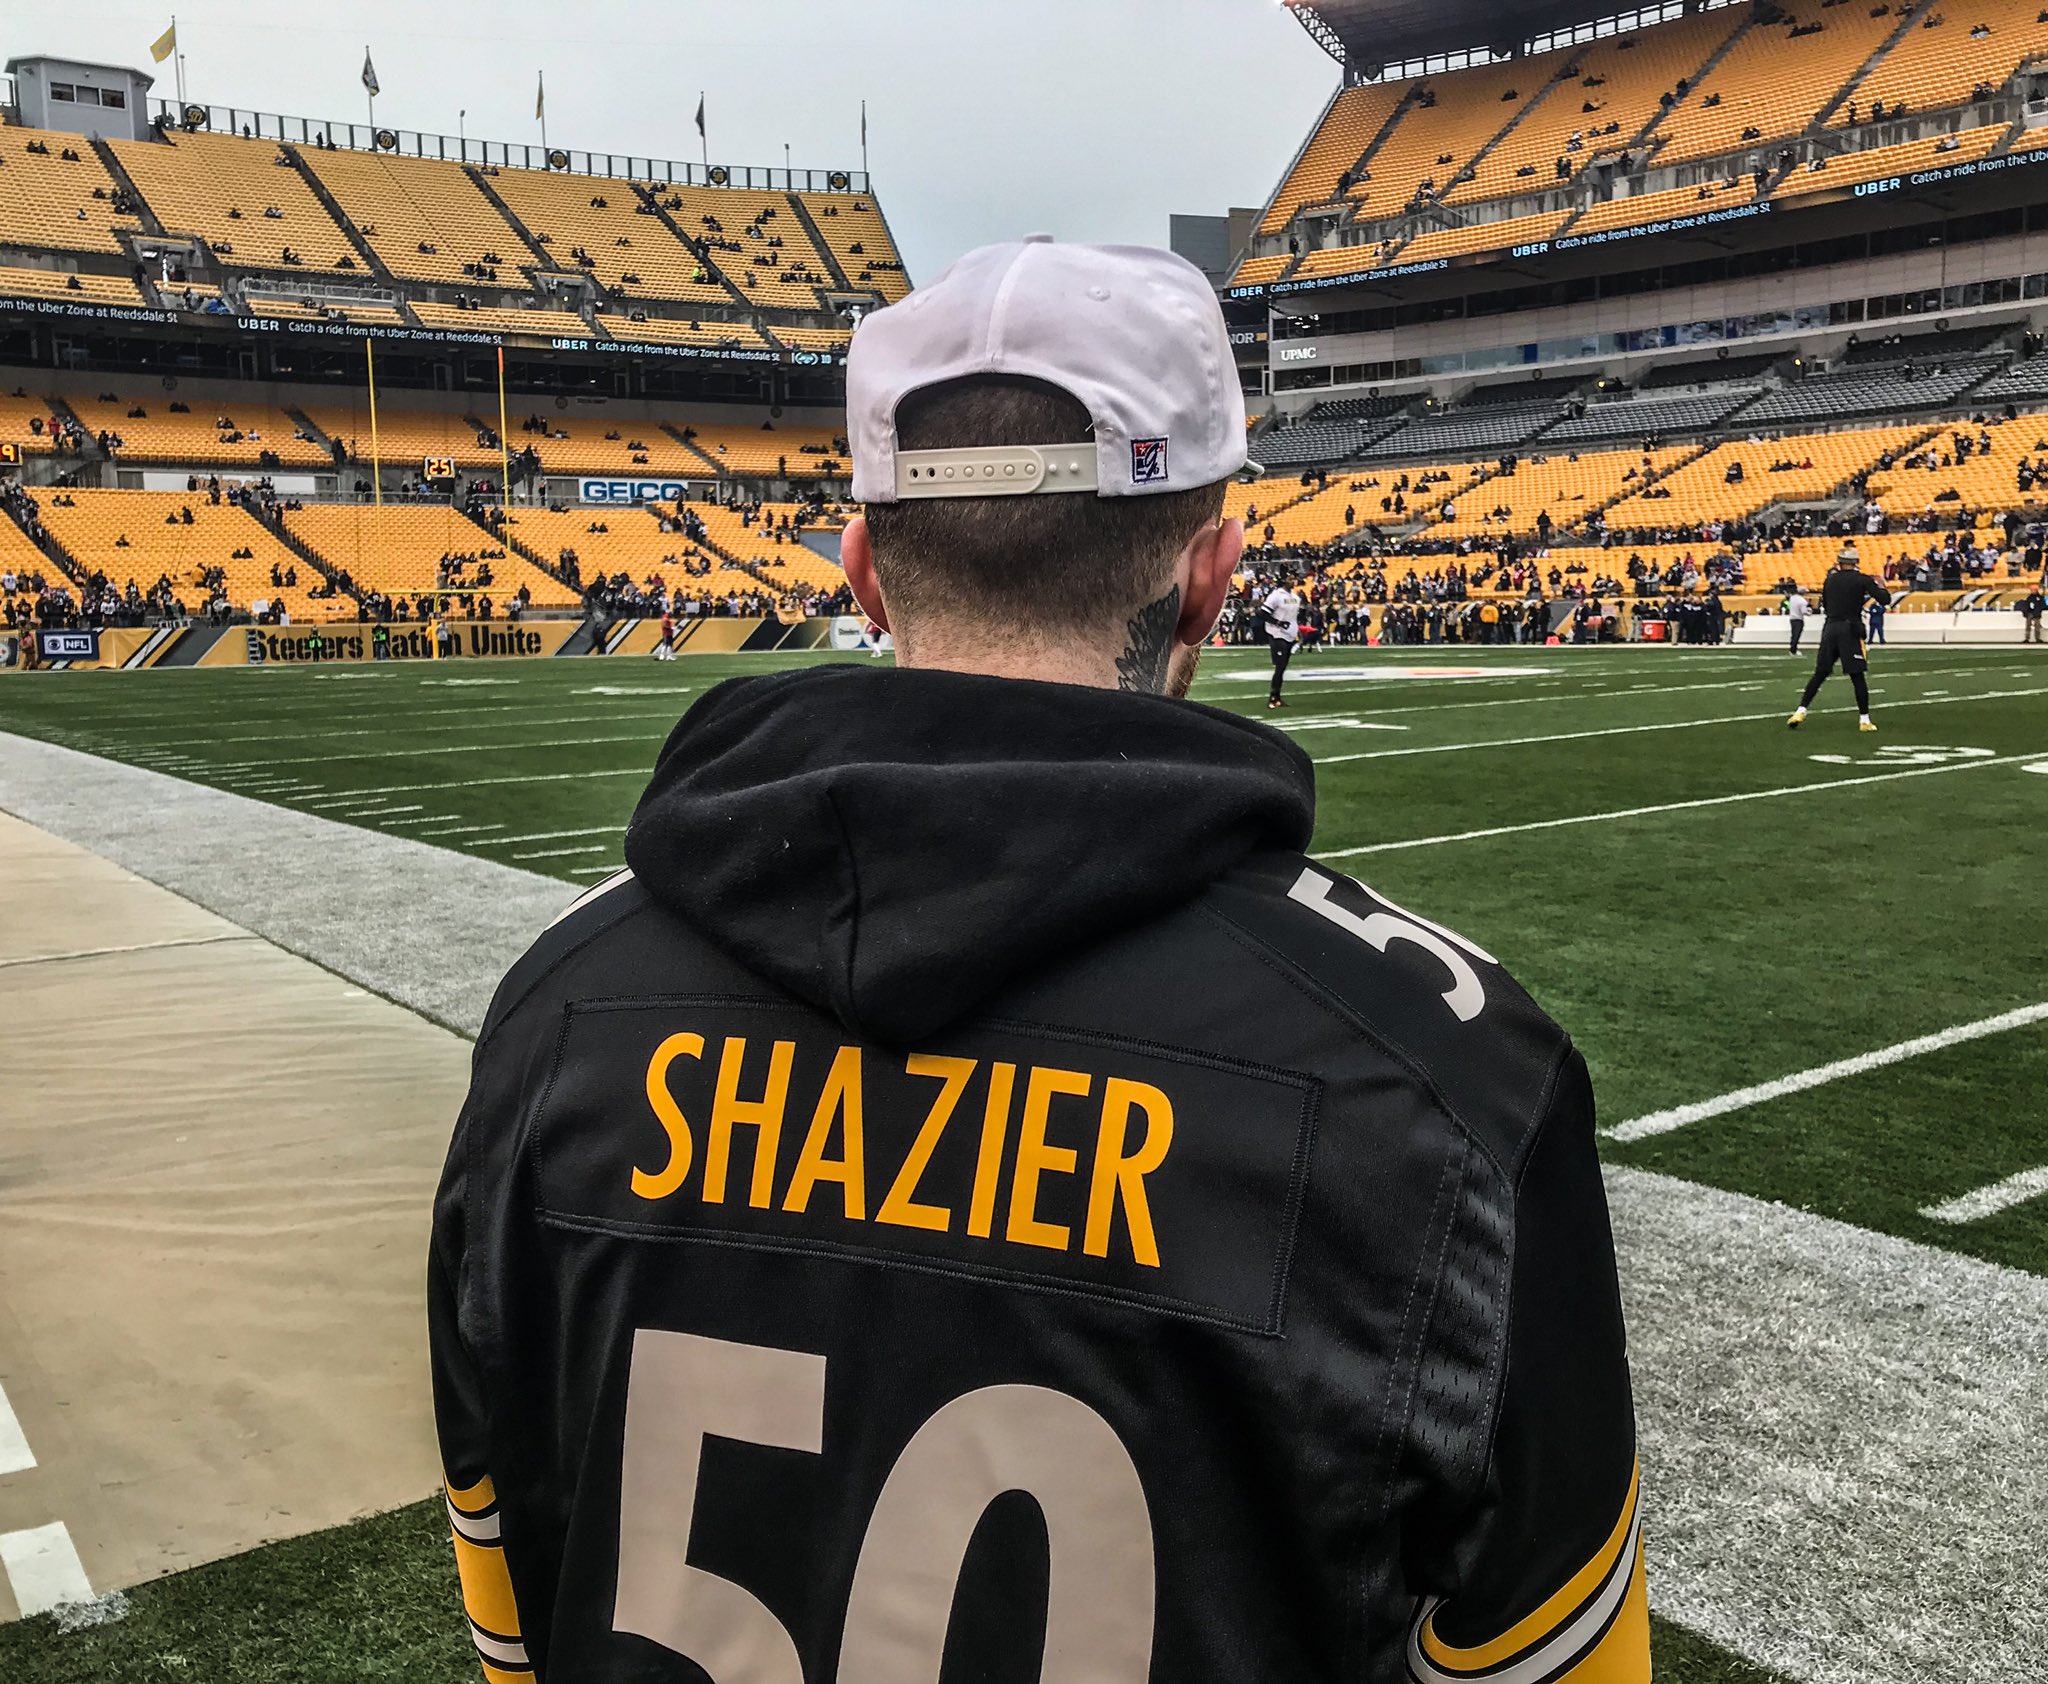 TSN on X: The #Penguins, #Steelers and #Pirates all paid their respect to  #Pittsburgh rapper #MacMiller, who passed away on Friday.   / X